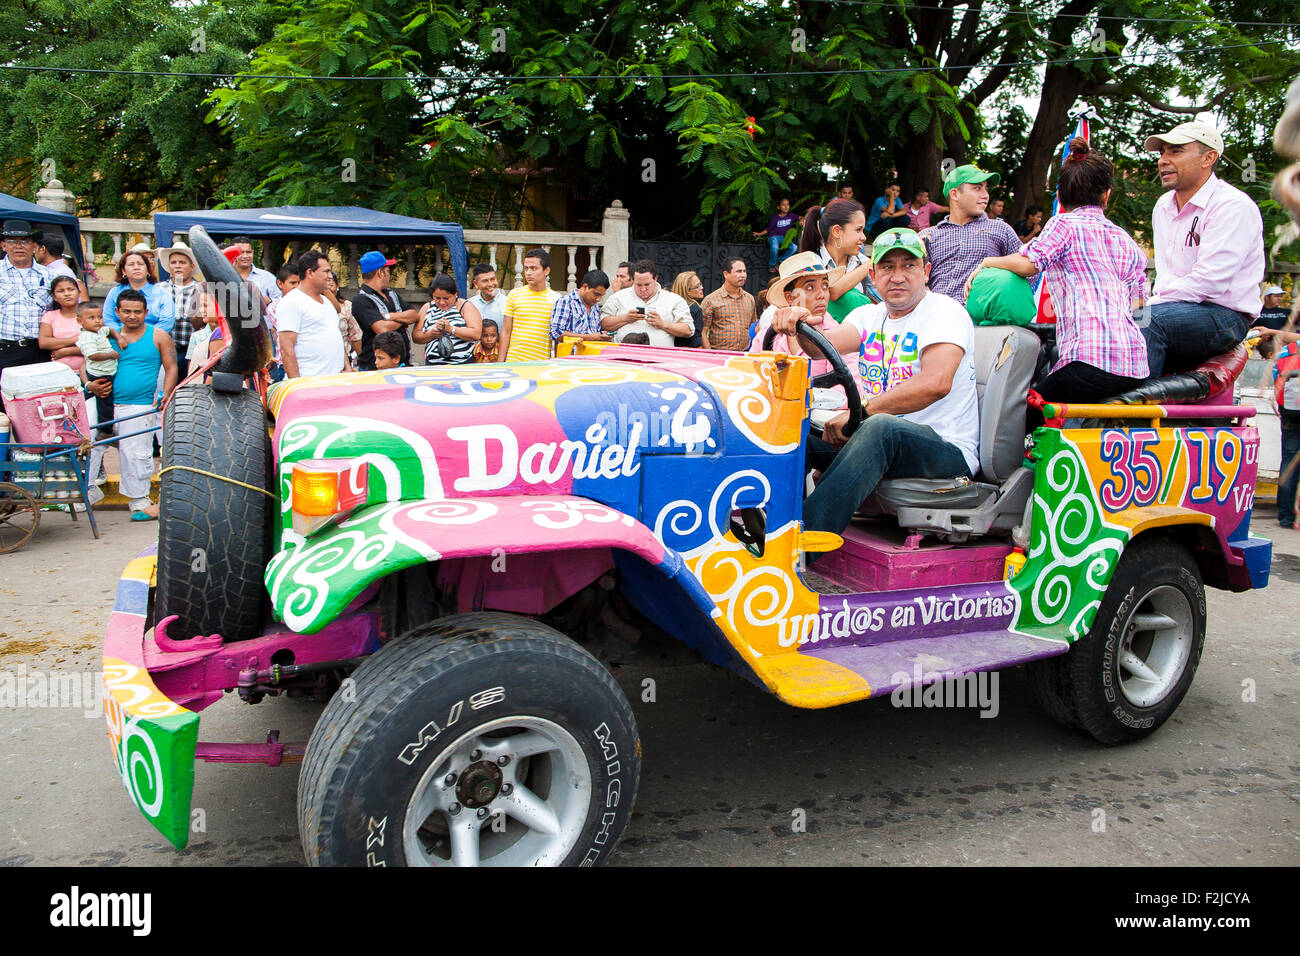 A brightly painted jeep promotes and supports Sandanista Daniel Ortega at the annual tope or horse parade in Granada, Nicaragua Stock Photo